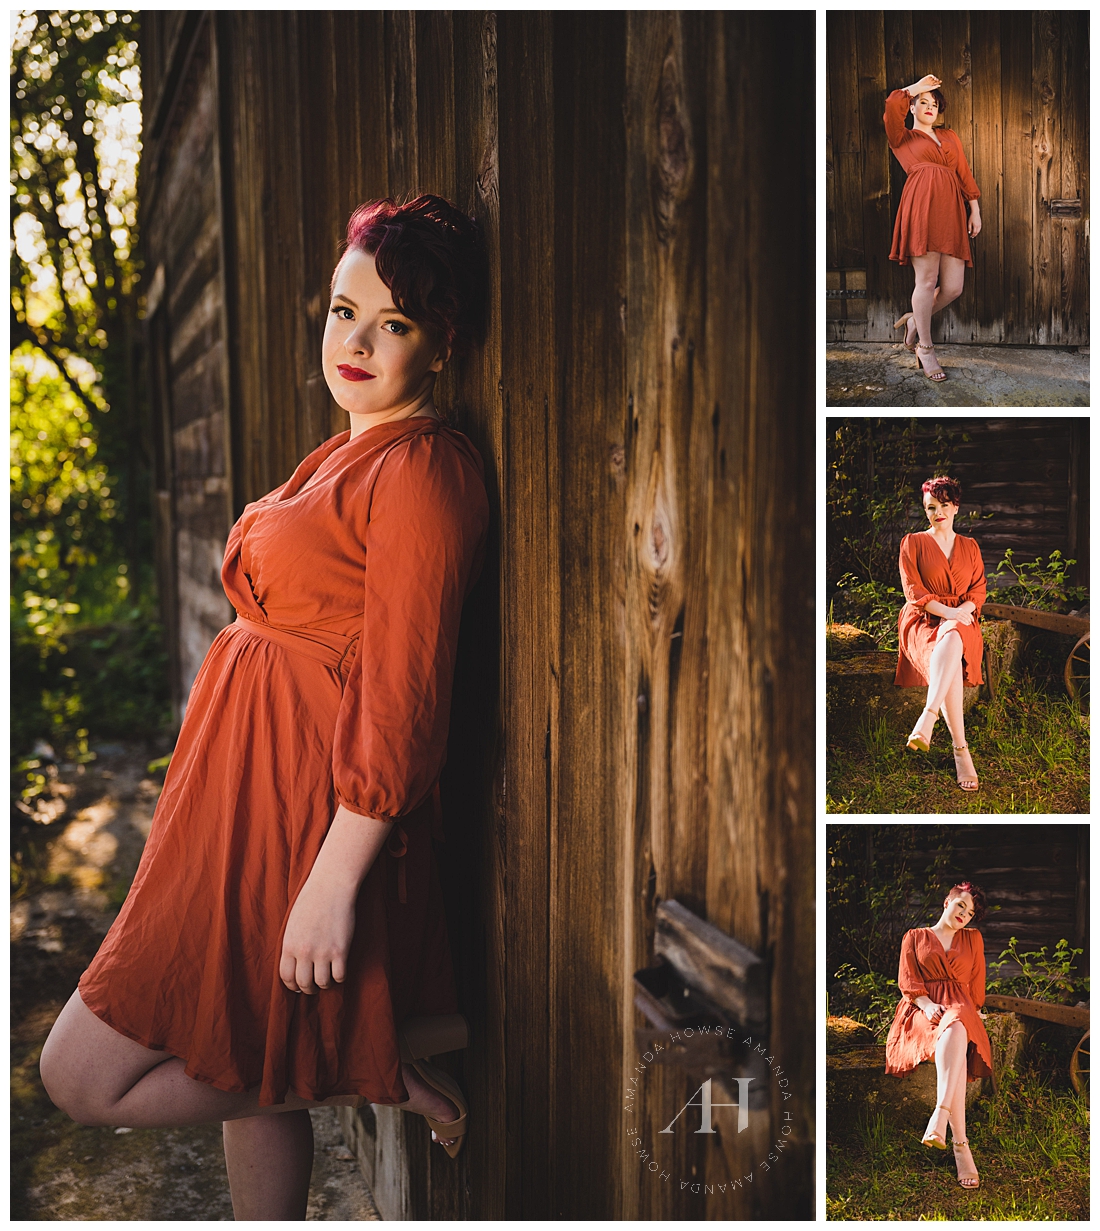 Glam Senior Portraits Outdoors | Gig Harbor Portrait Session with Outfit Ideas for High School Seniors | Photographed by the Best Tacoma Senior Photographer Amanda Howse Photography